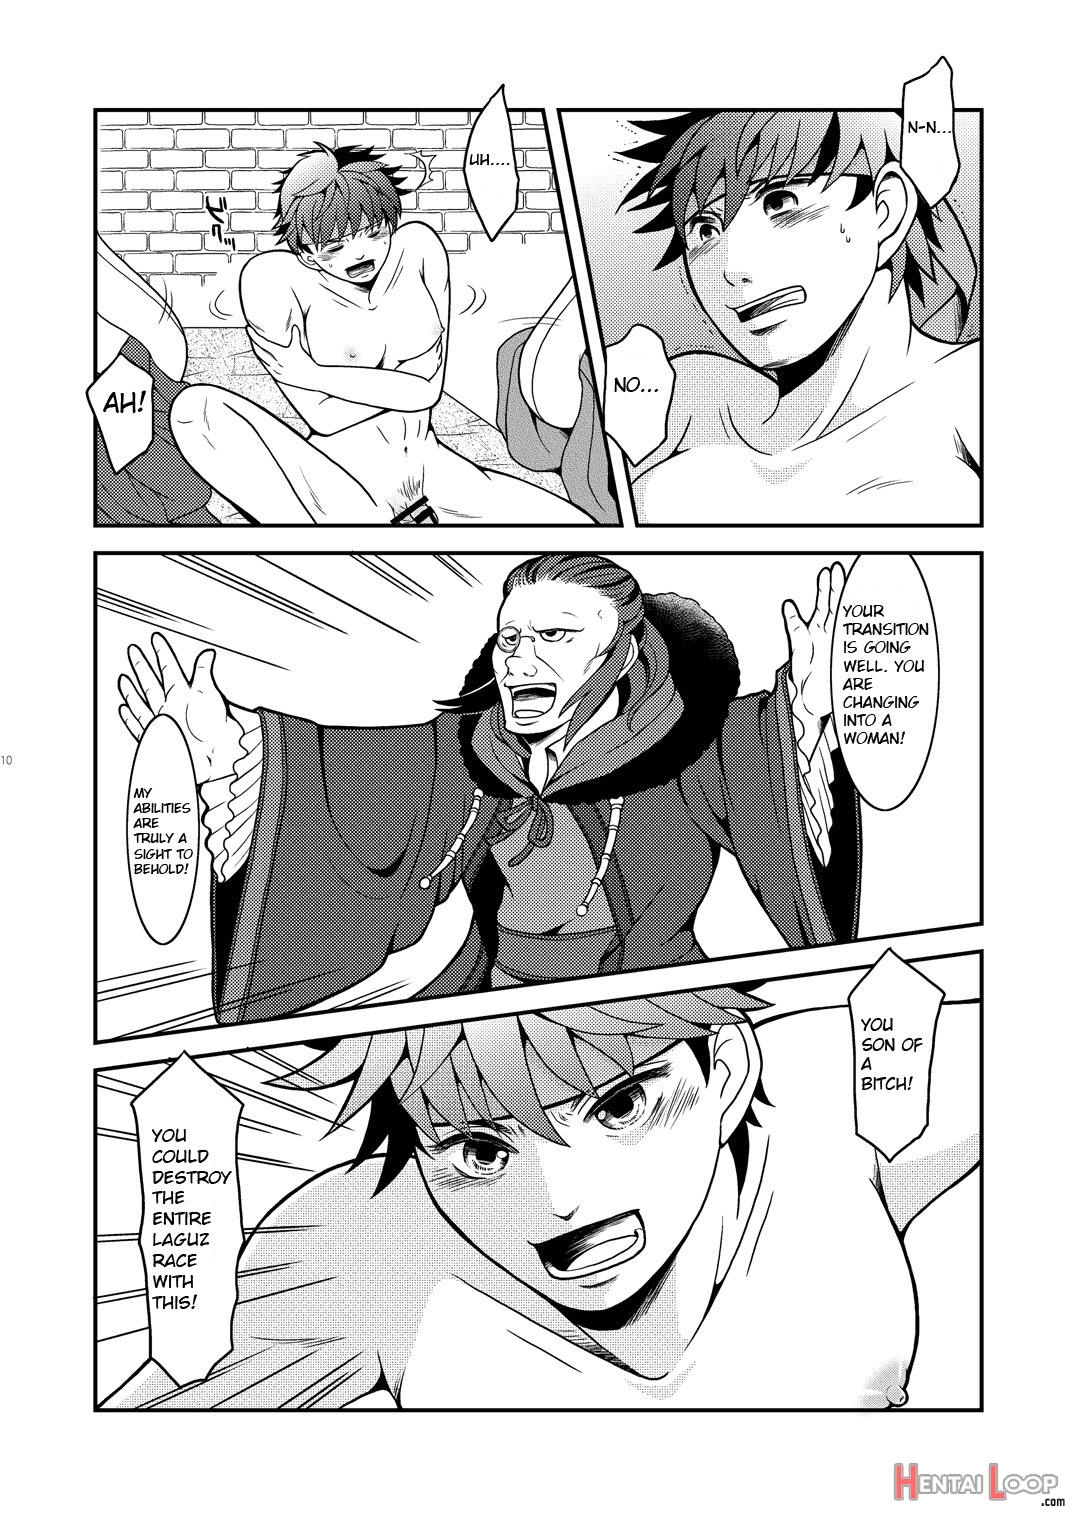 The Story Of Ike's Transition To A Woman's Body page 9